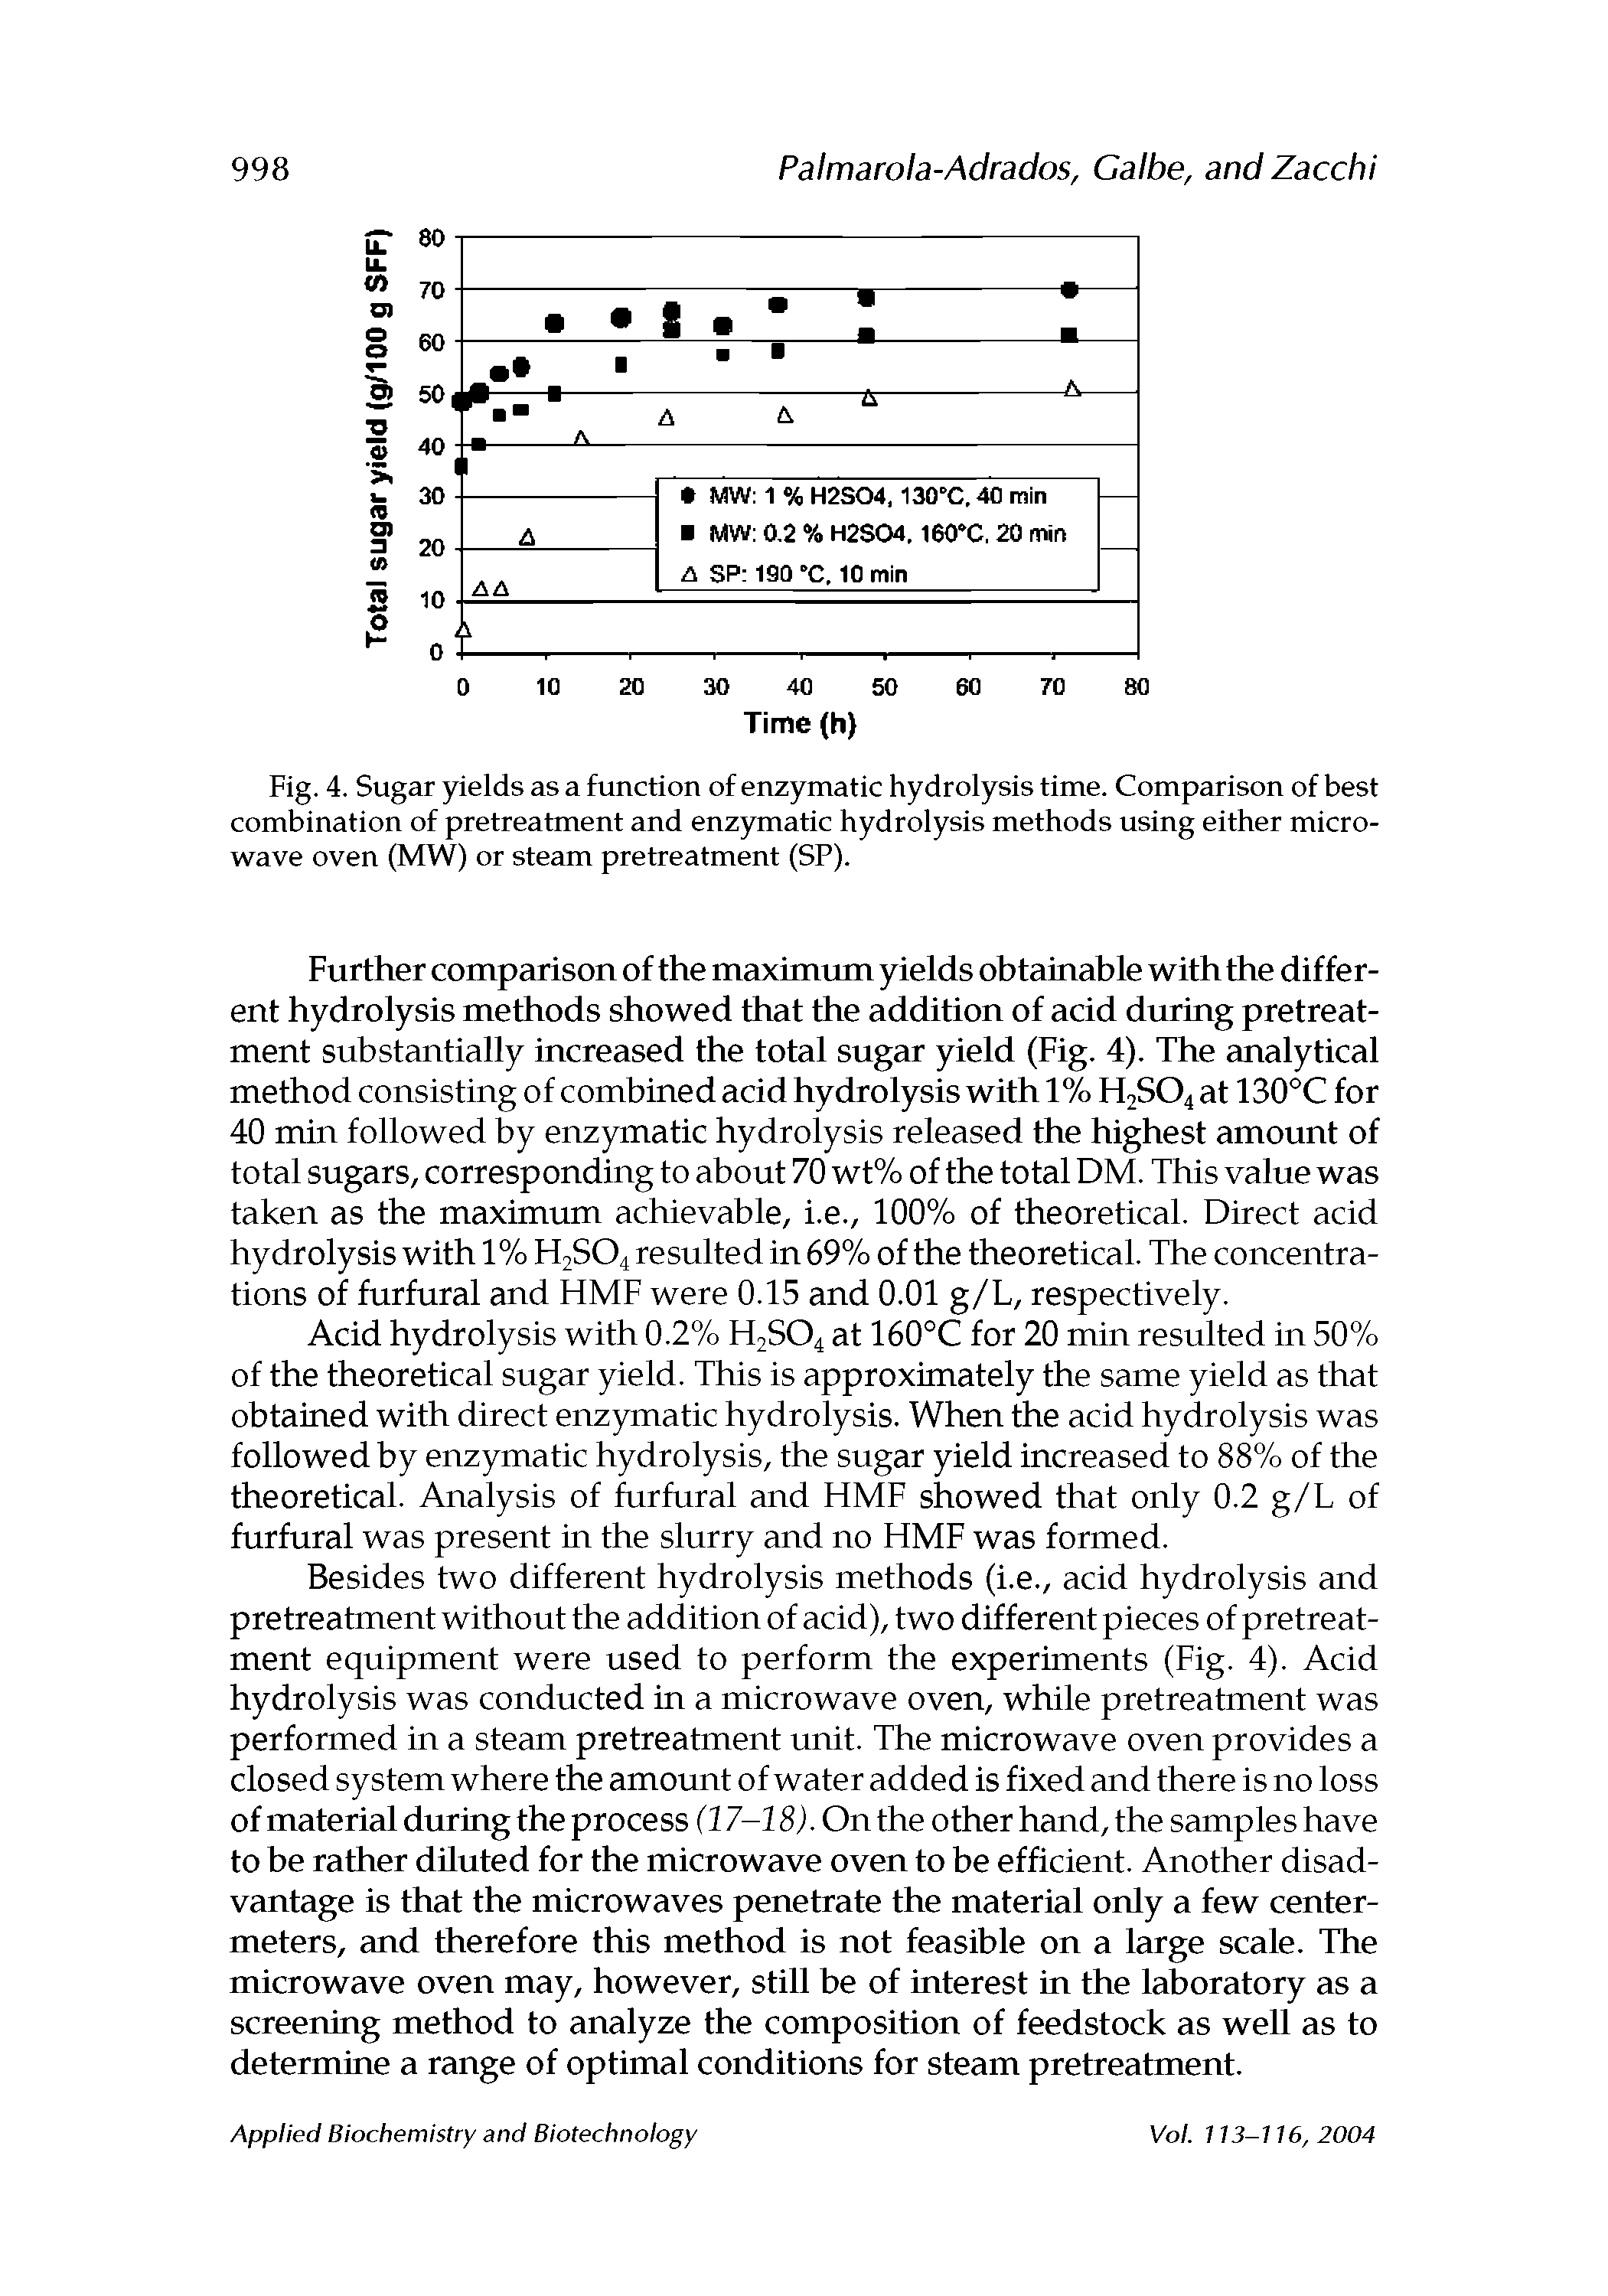 Fig. 4. Sugar yields as a function of enzymatic hydrolysis time. Comparison of best combination of pretreatment and enzymatic hydrolysis methods using either micro-wave oven (MW) or steam pretreatment (SP).